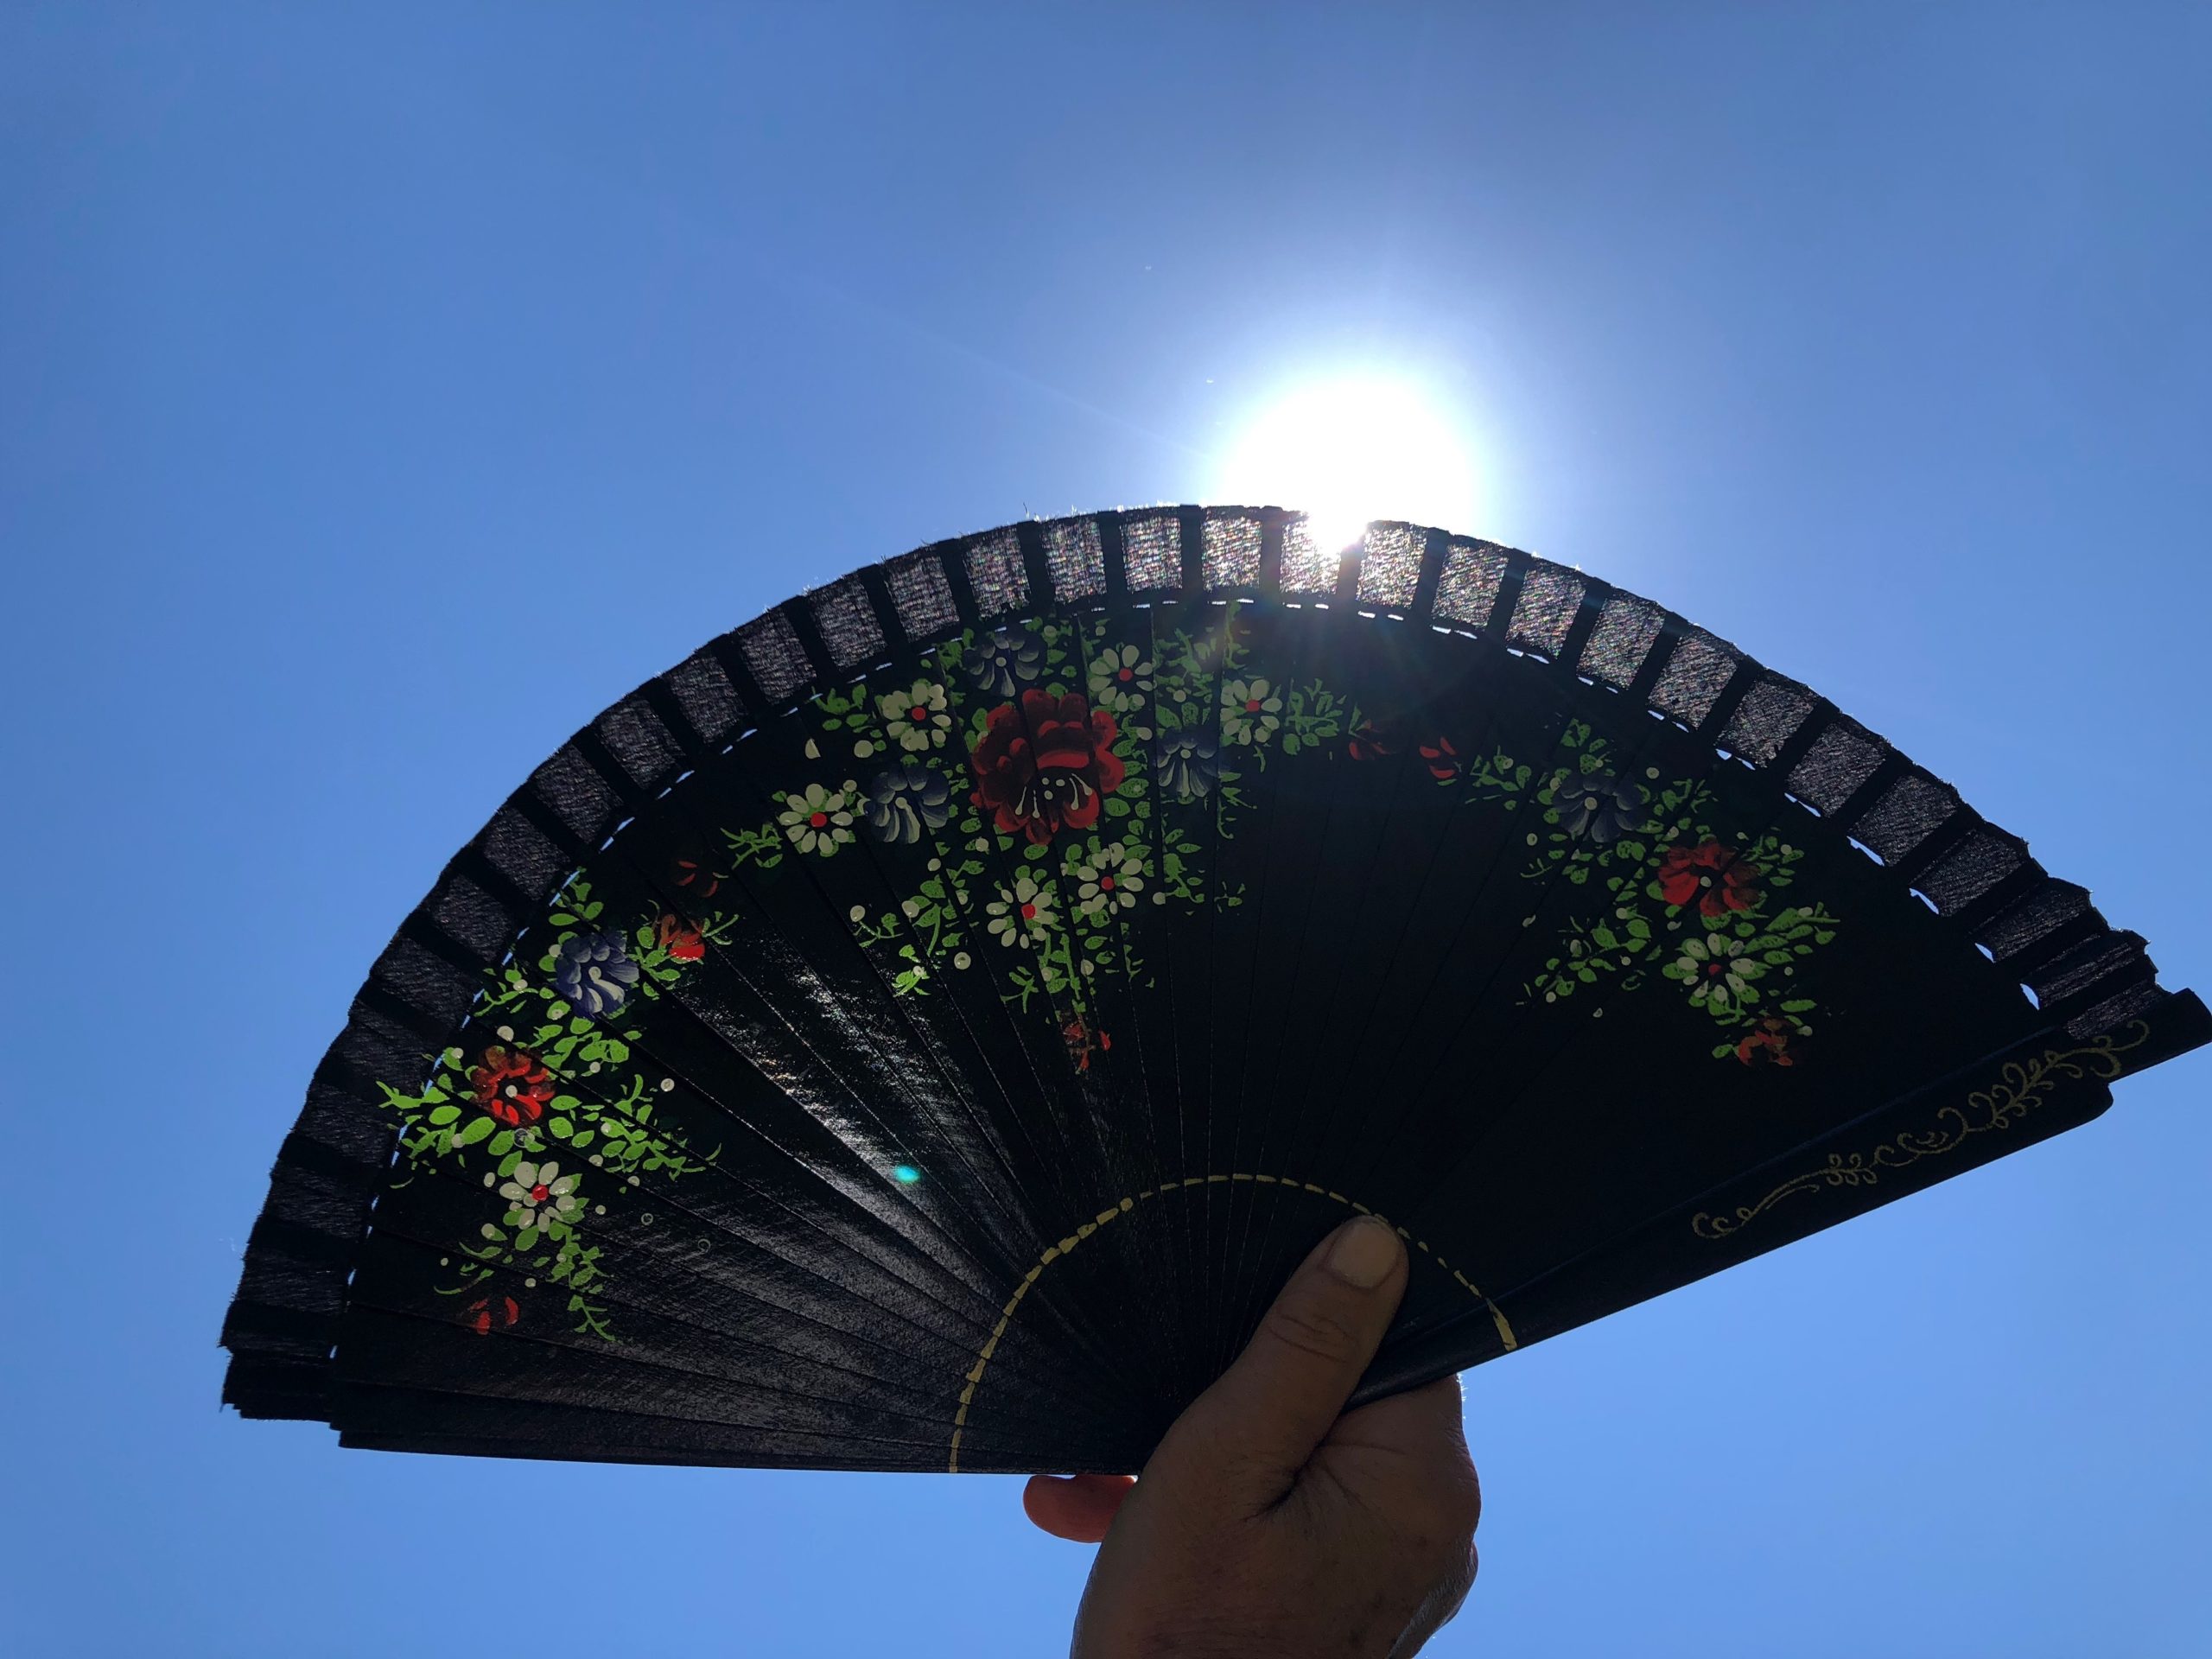 Hand fans are a secret weapon against the heat, providing instant relief and so easy to carry. A sturdy silk fan that flips open fast costs about $10.